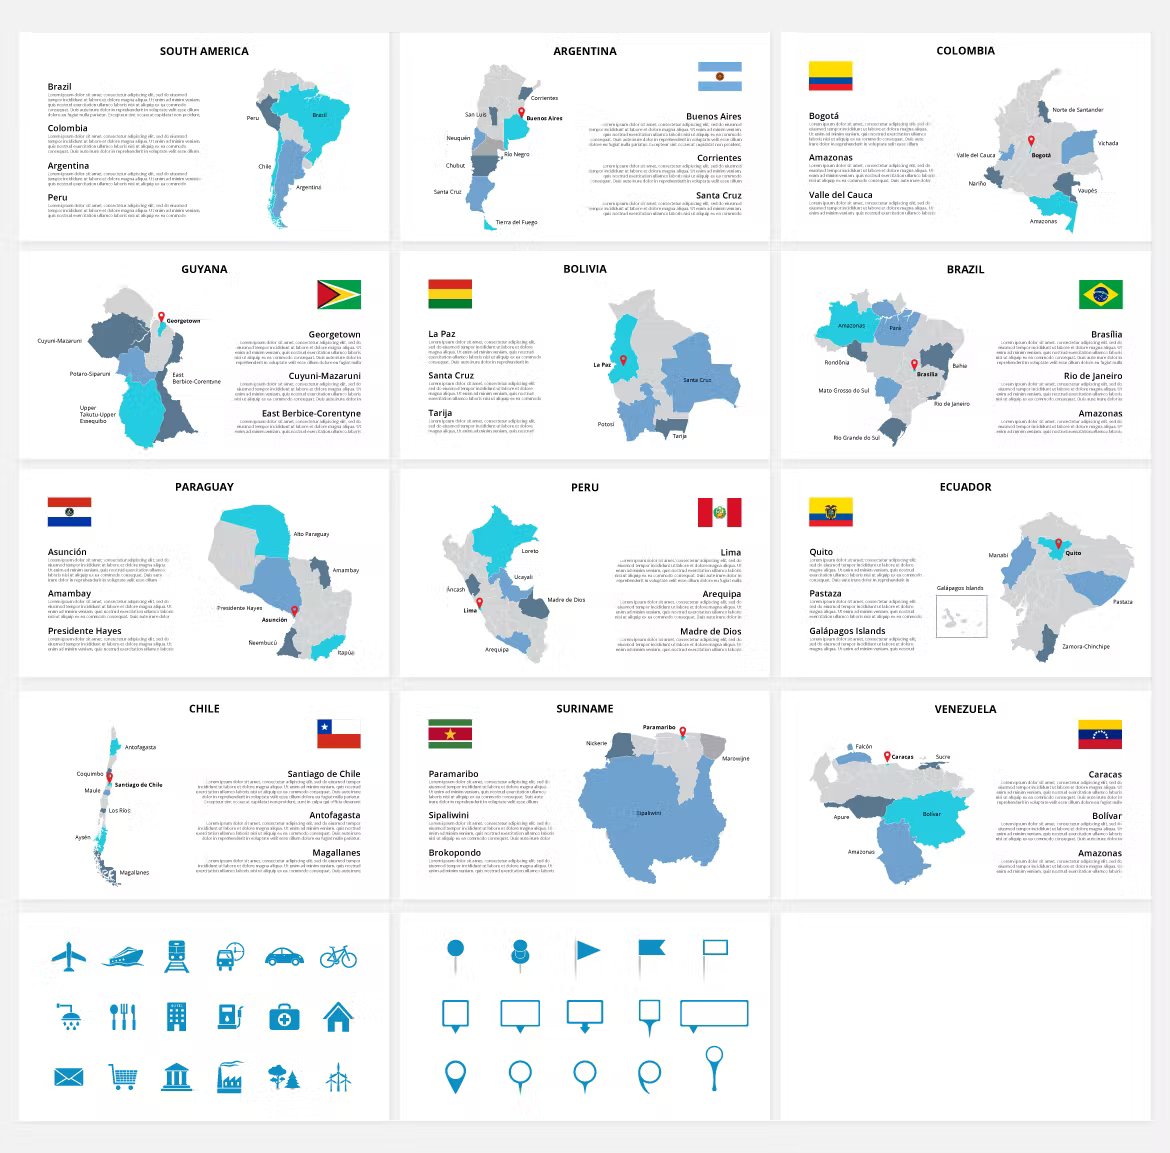 A set of 16 different animated south america maps powerpoint templates in gray, blue and white on a gray background.